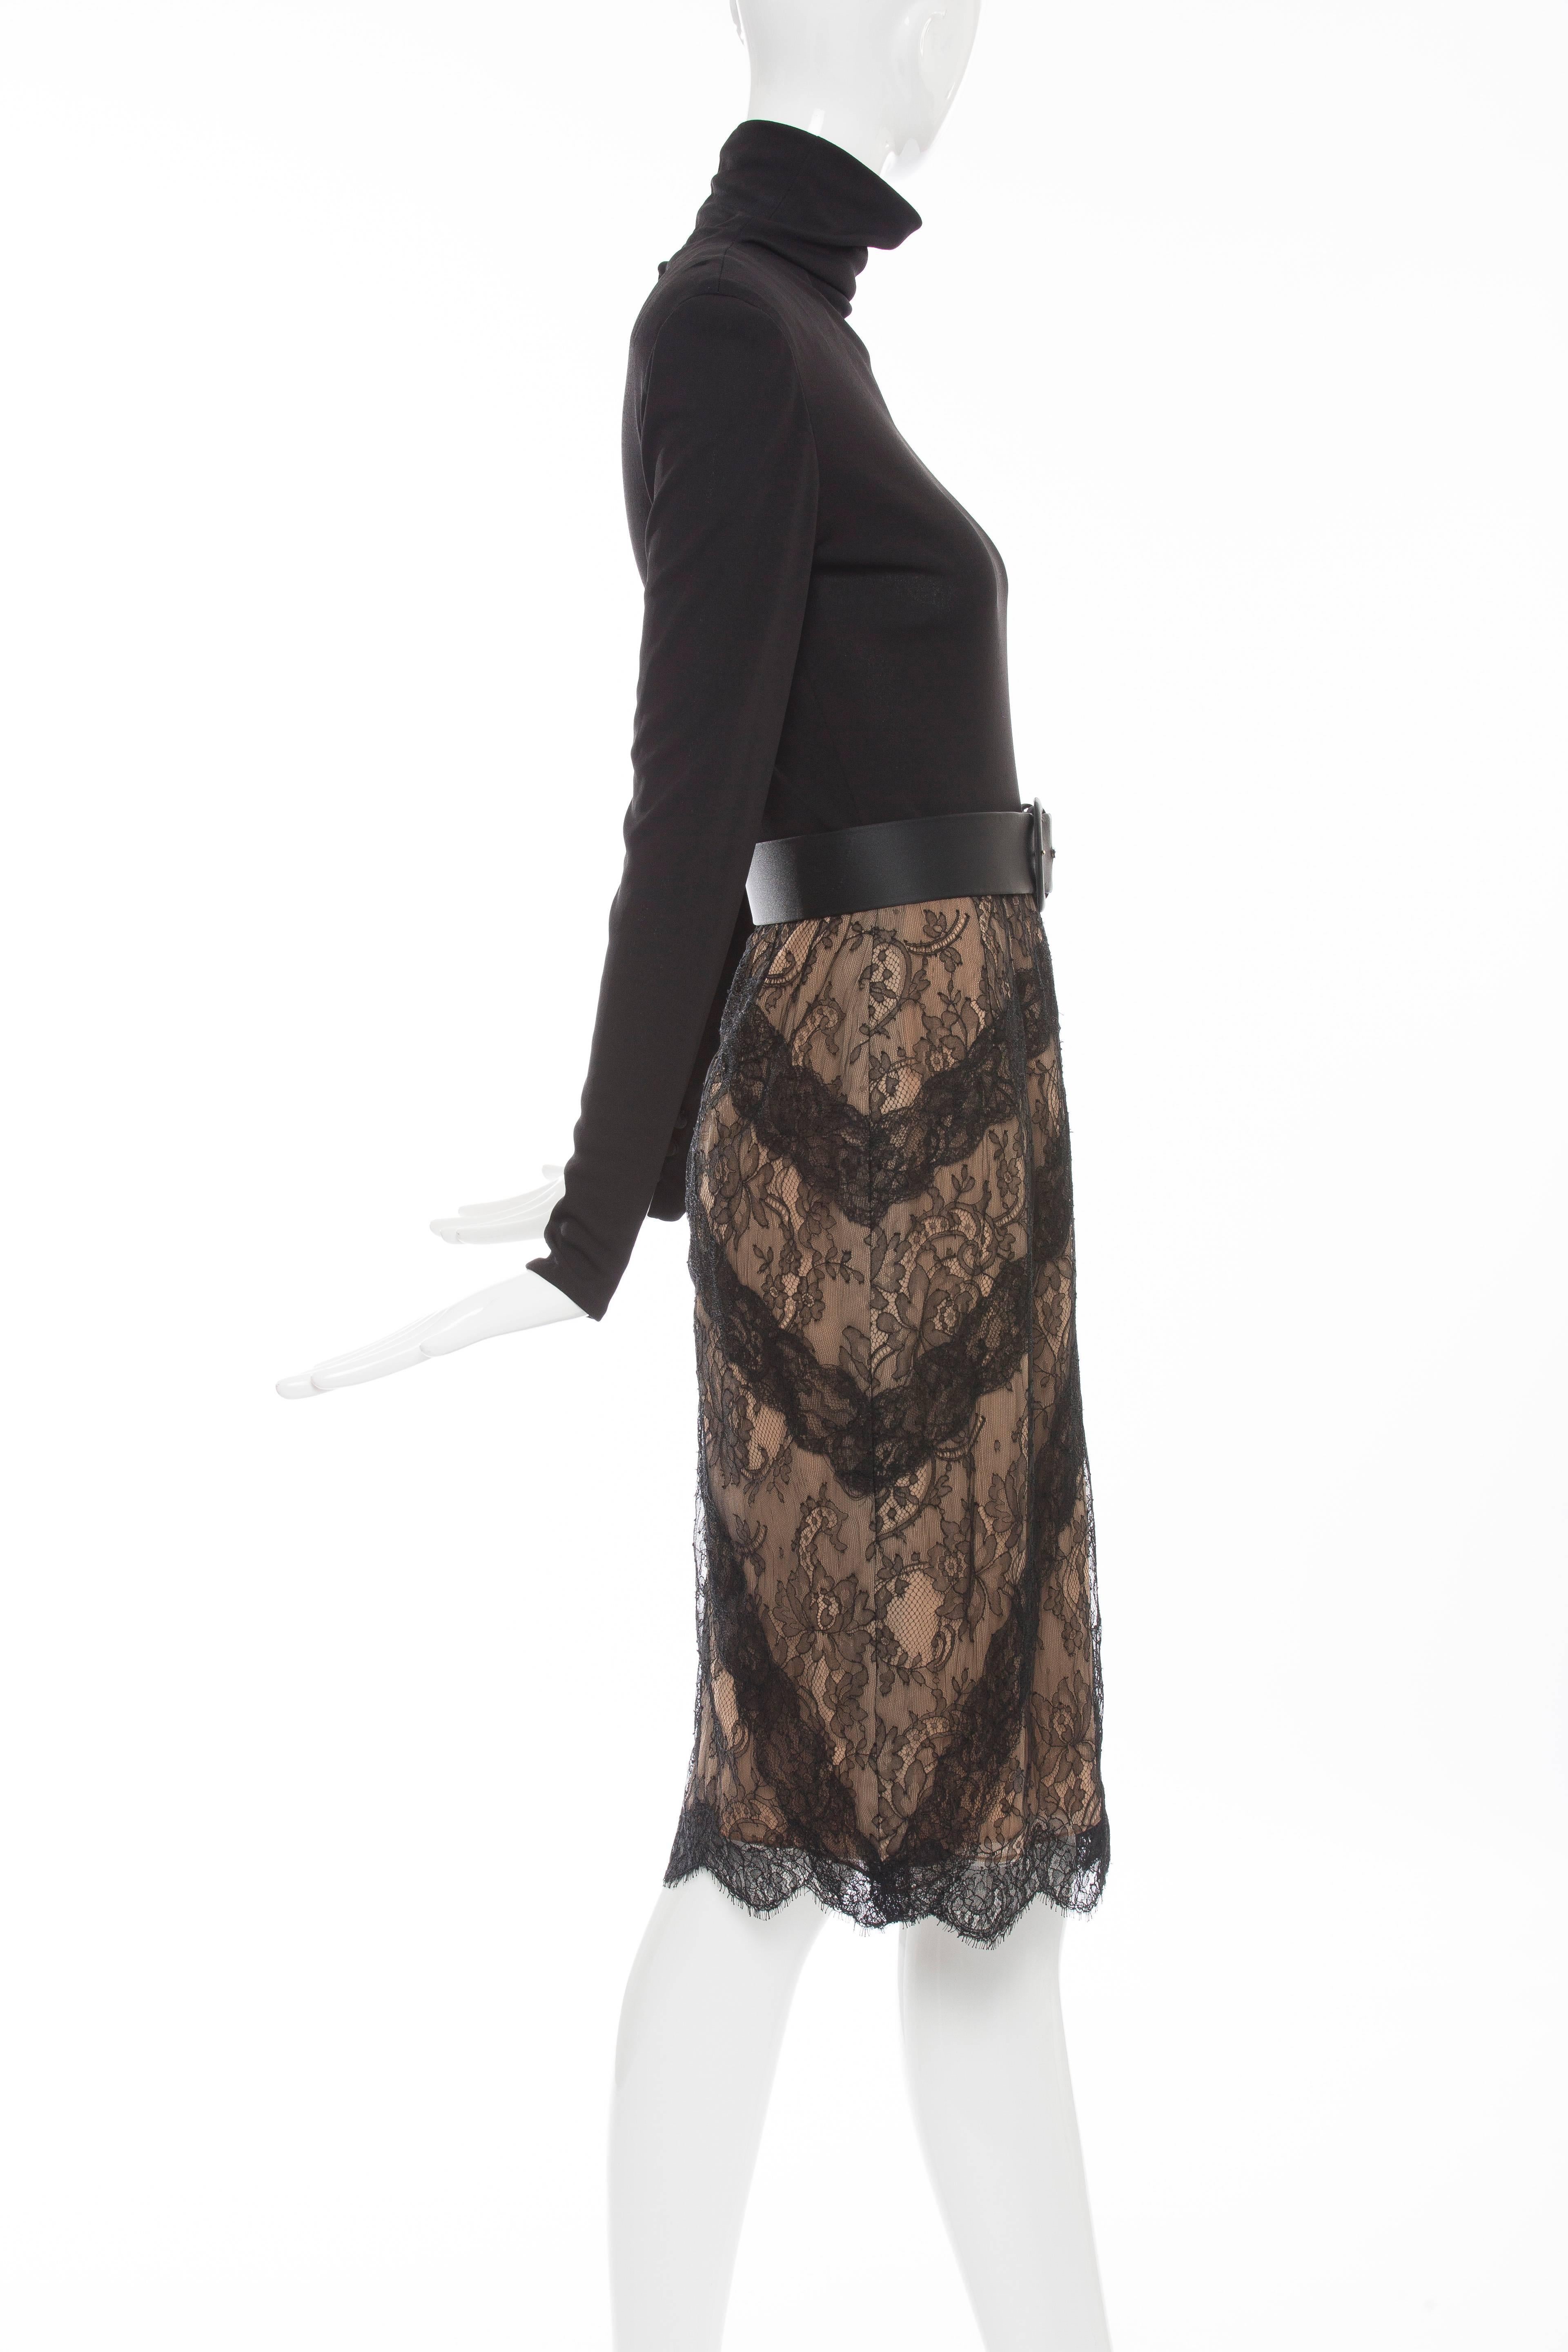 Bill Blass, Circa 1980's, dress with imported lace skirt, satin belt, back zip and hook and eye detail.